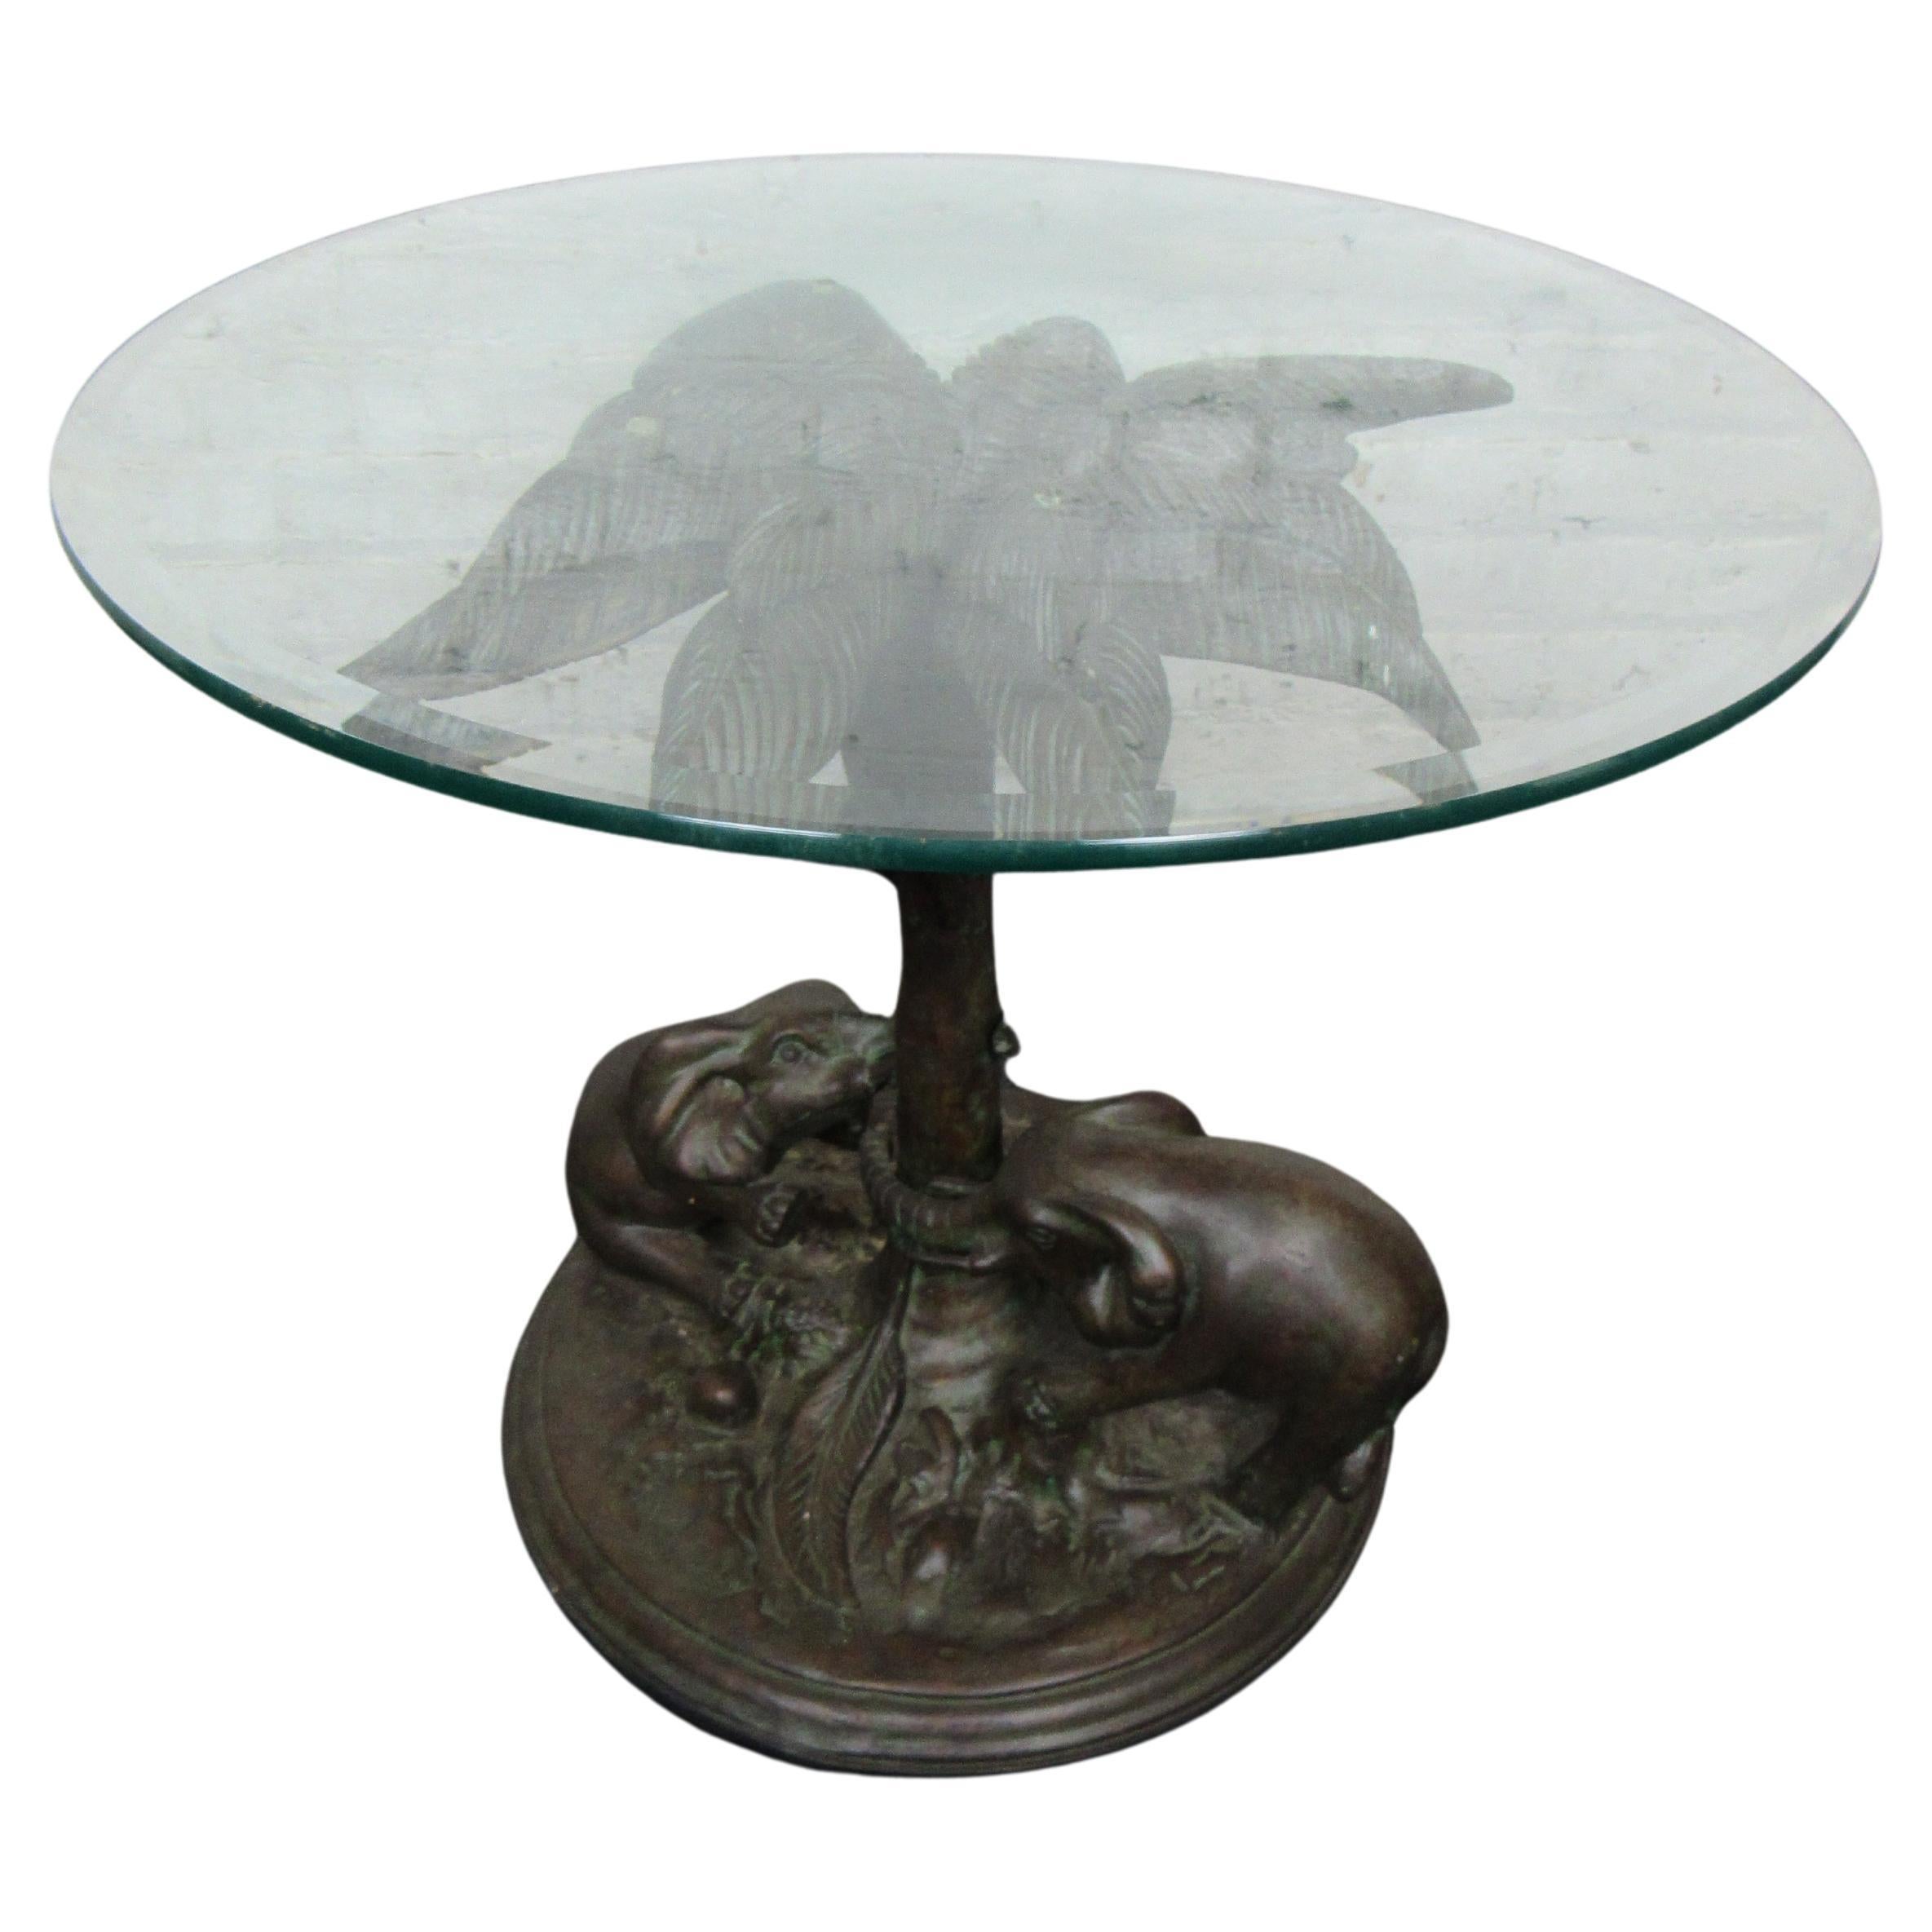 This side table features a heavy rounded glass top that sits upon an elaborately sculpted base. The base uses a palm tree to hold up the table's top, and two small elephant figures adorn the bottom of the base. 

Please confirm item location with